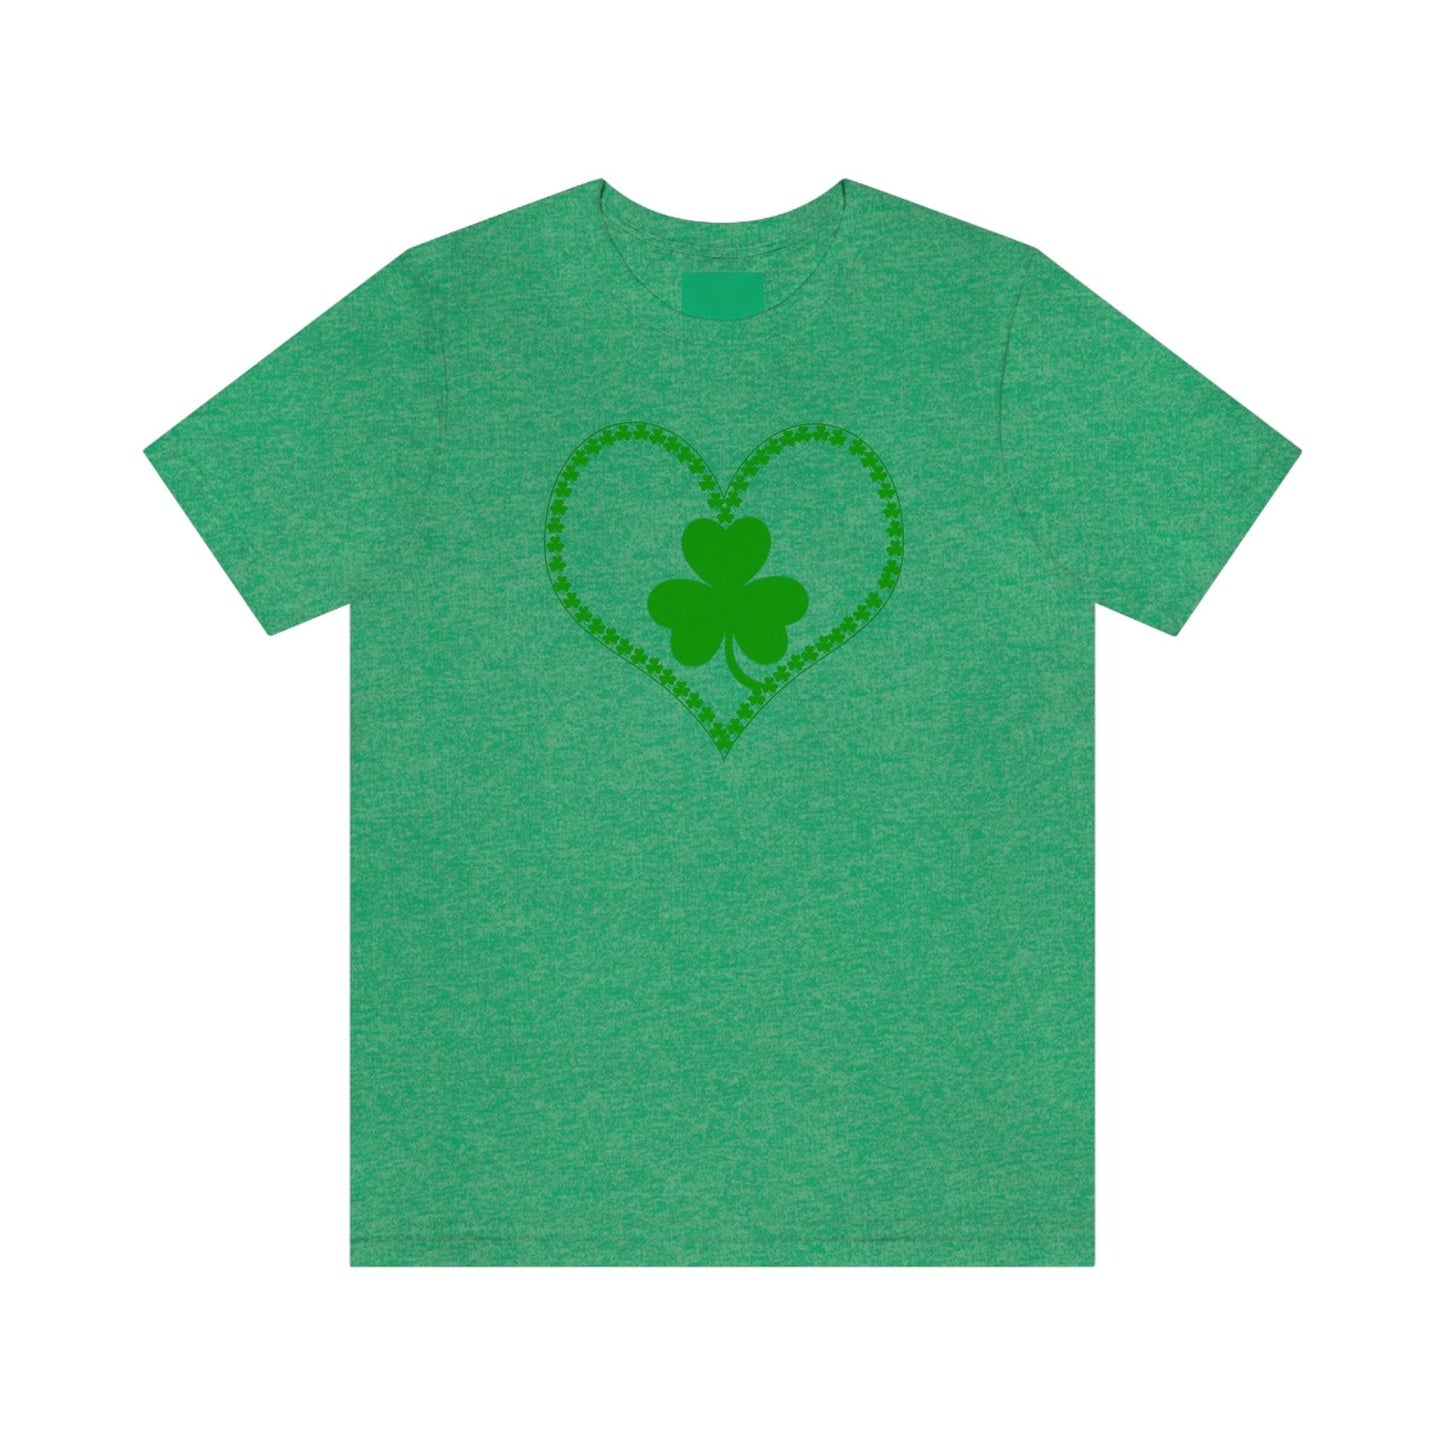 St Patrick's Day shirt Feeling Lucky Shirt One Lucky Teacher Shirt St Patrick's Day shirt - Funny St Paddy's day Funny Shirt Shamrock shirt - Giftsmojo